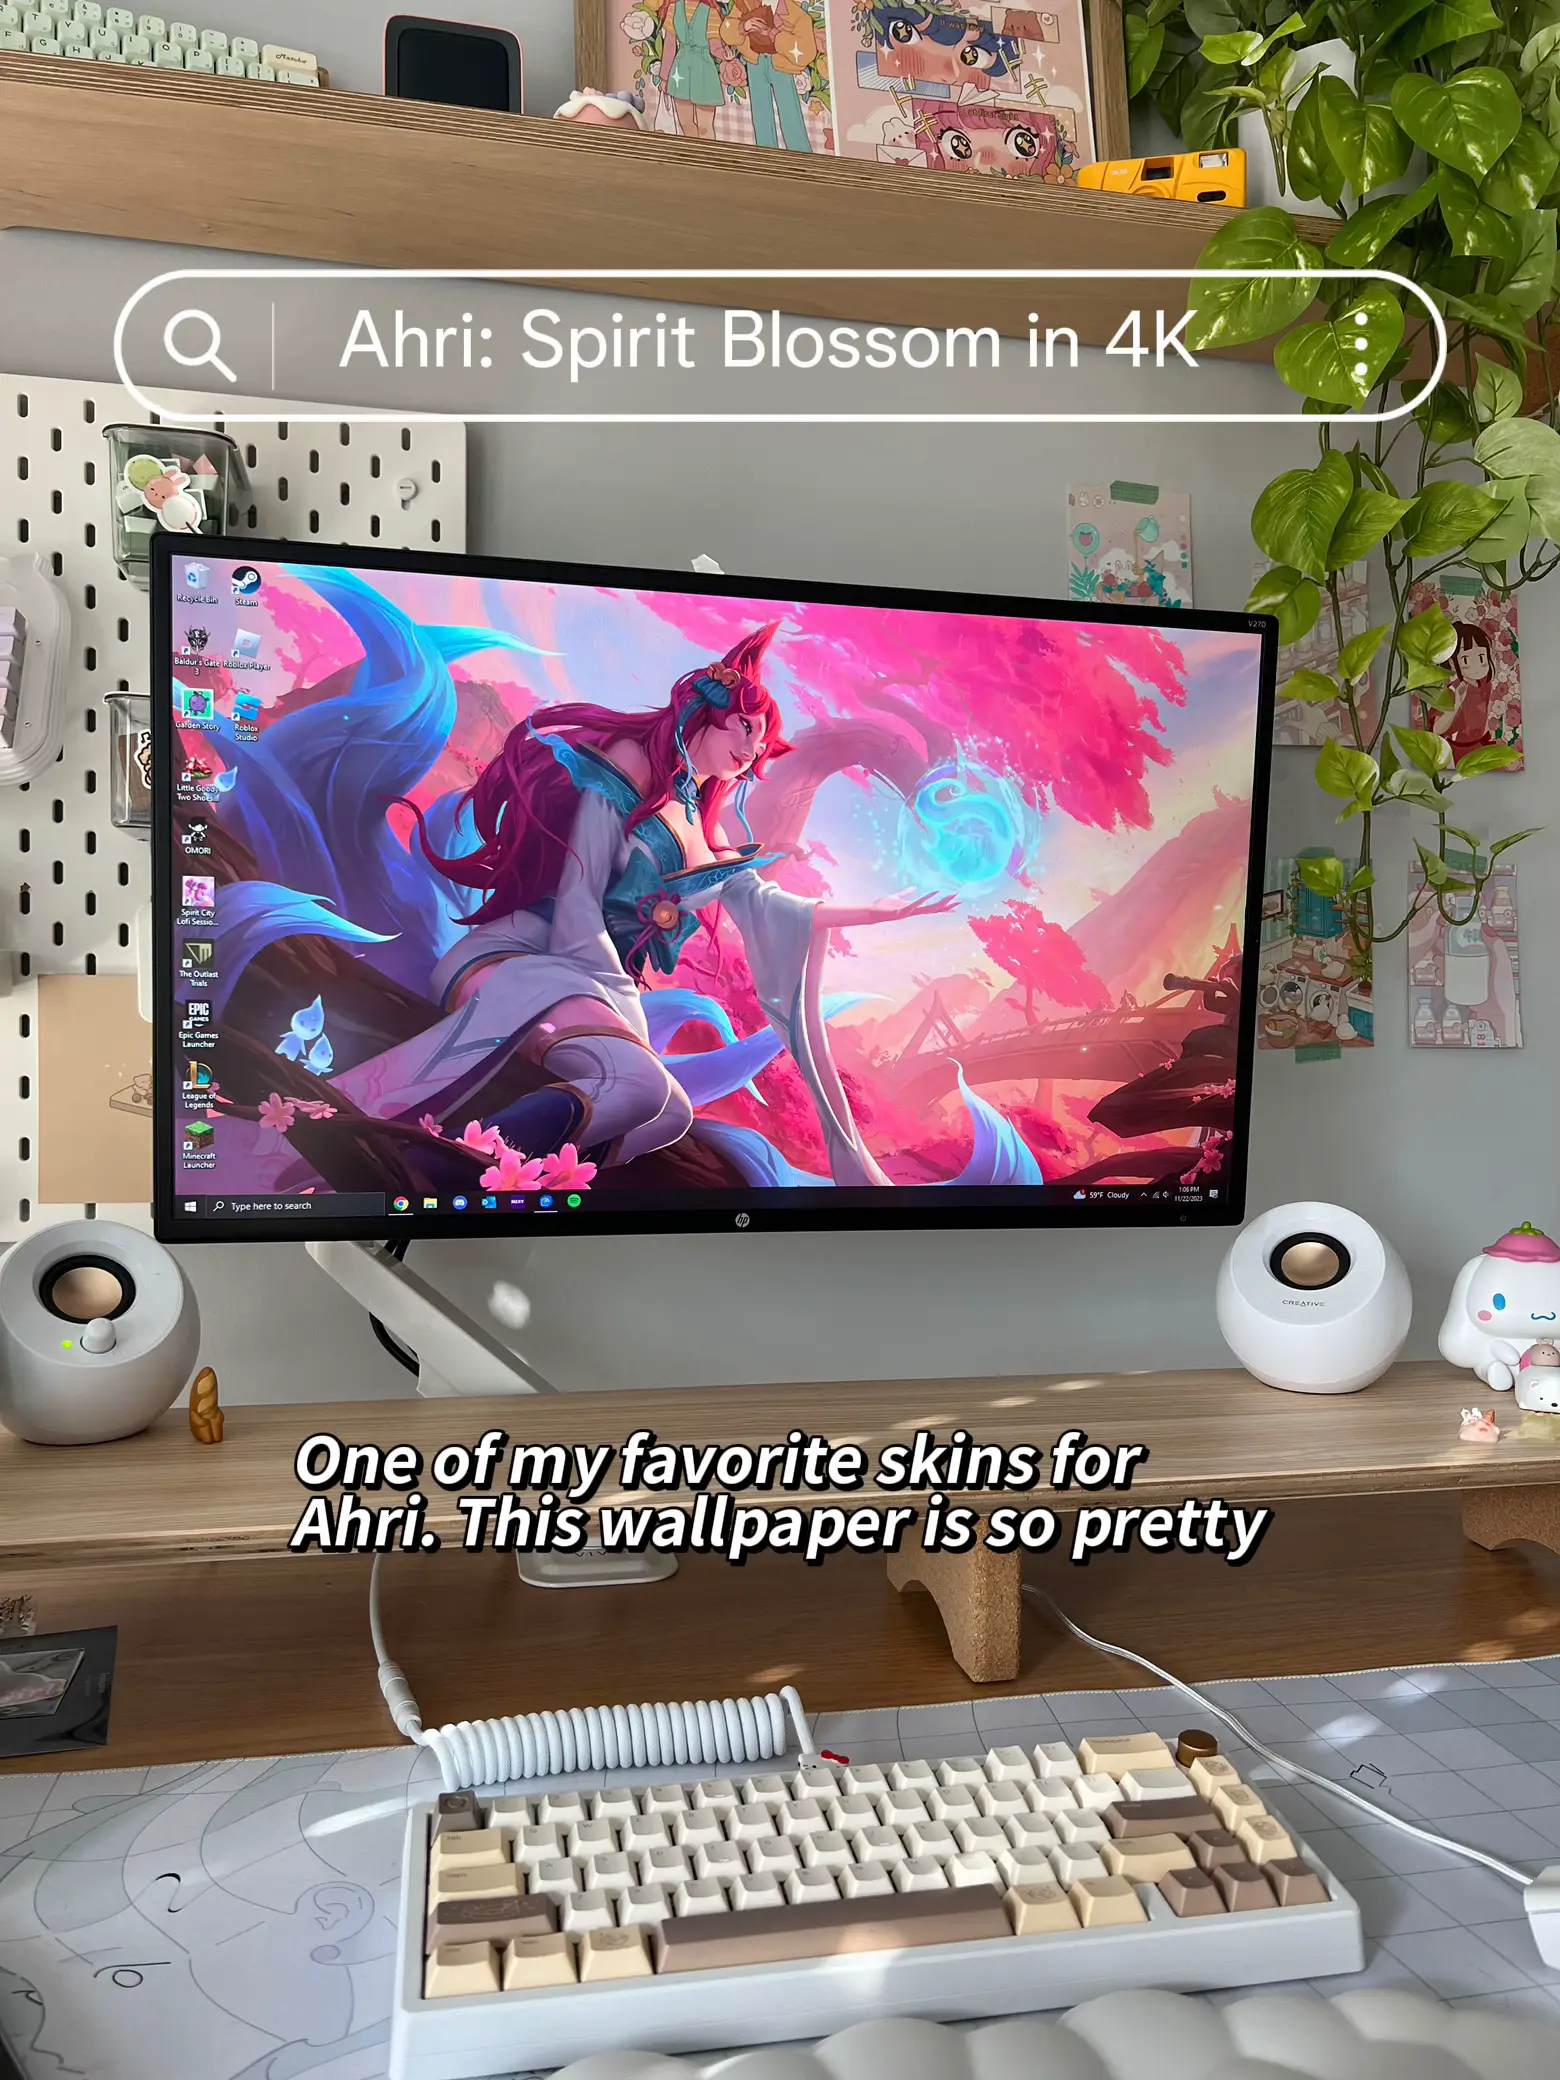 Wallpaper Engine has a library of live wallpapers that will spruce